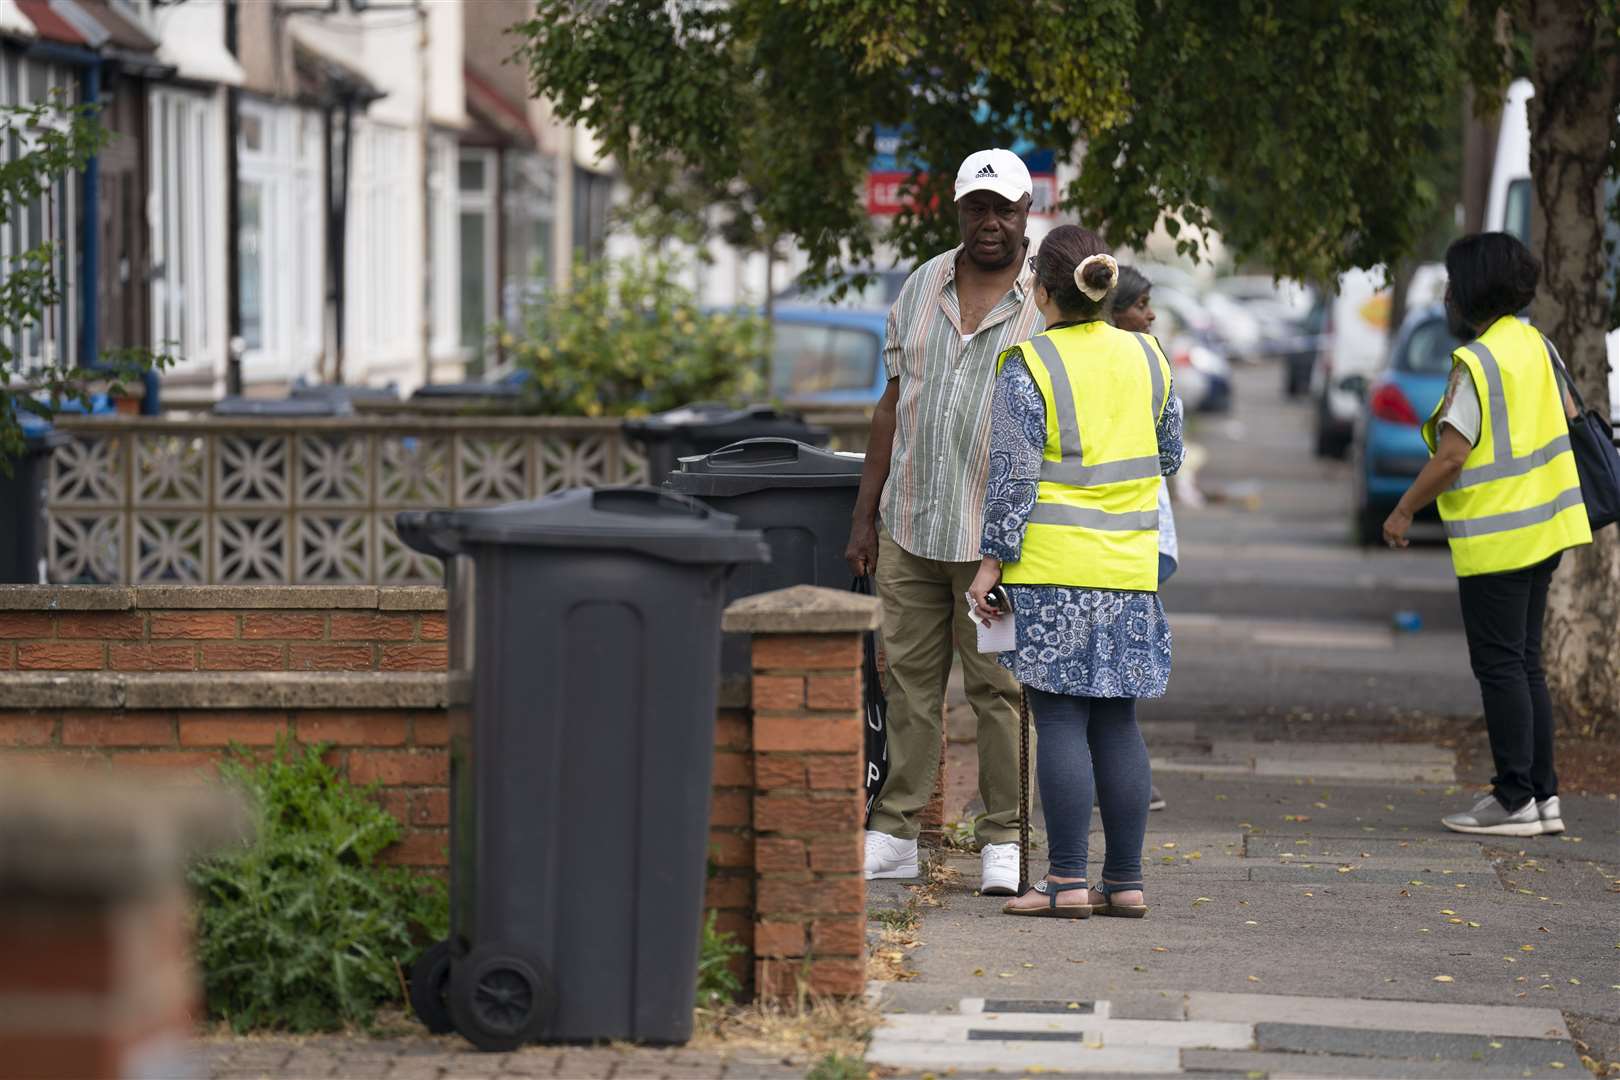 A council worker issues advice to residents (Kirsty O’Connor/PA)